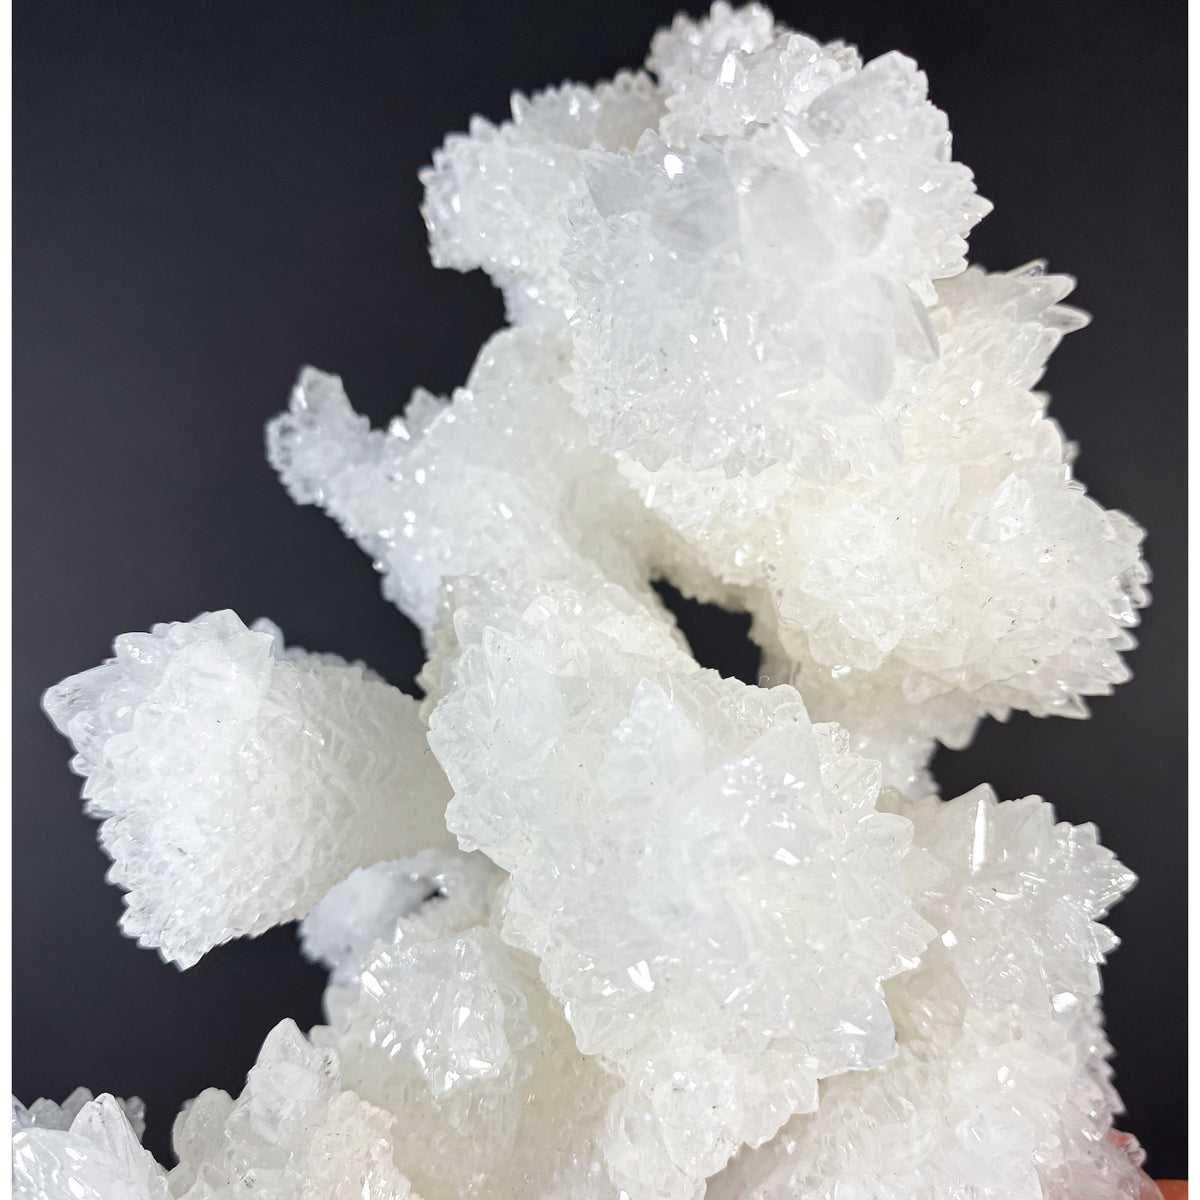 Aragonite (calcite) crystals from Mexico